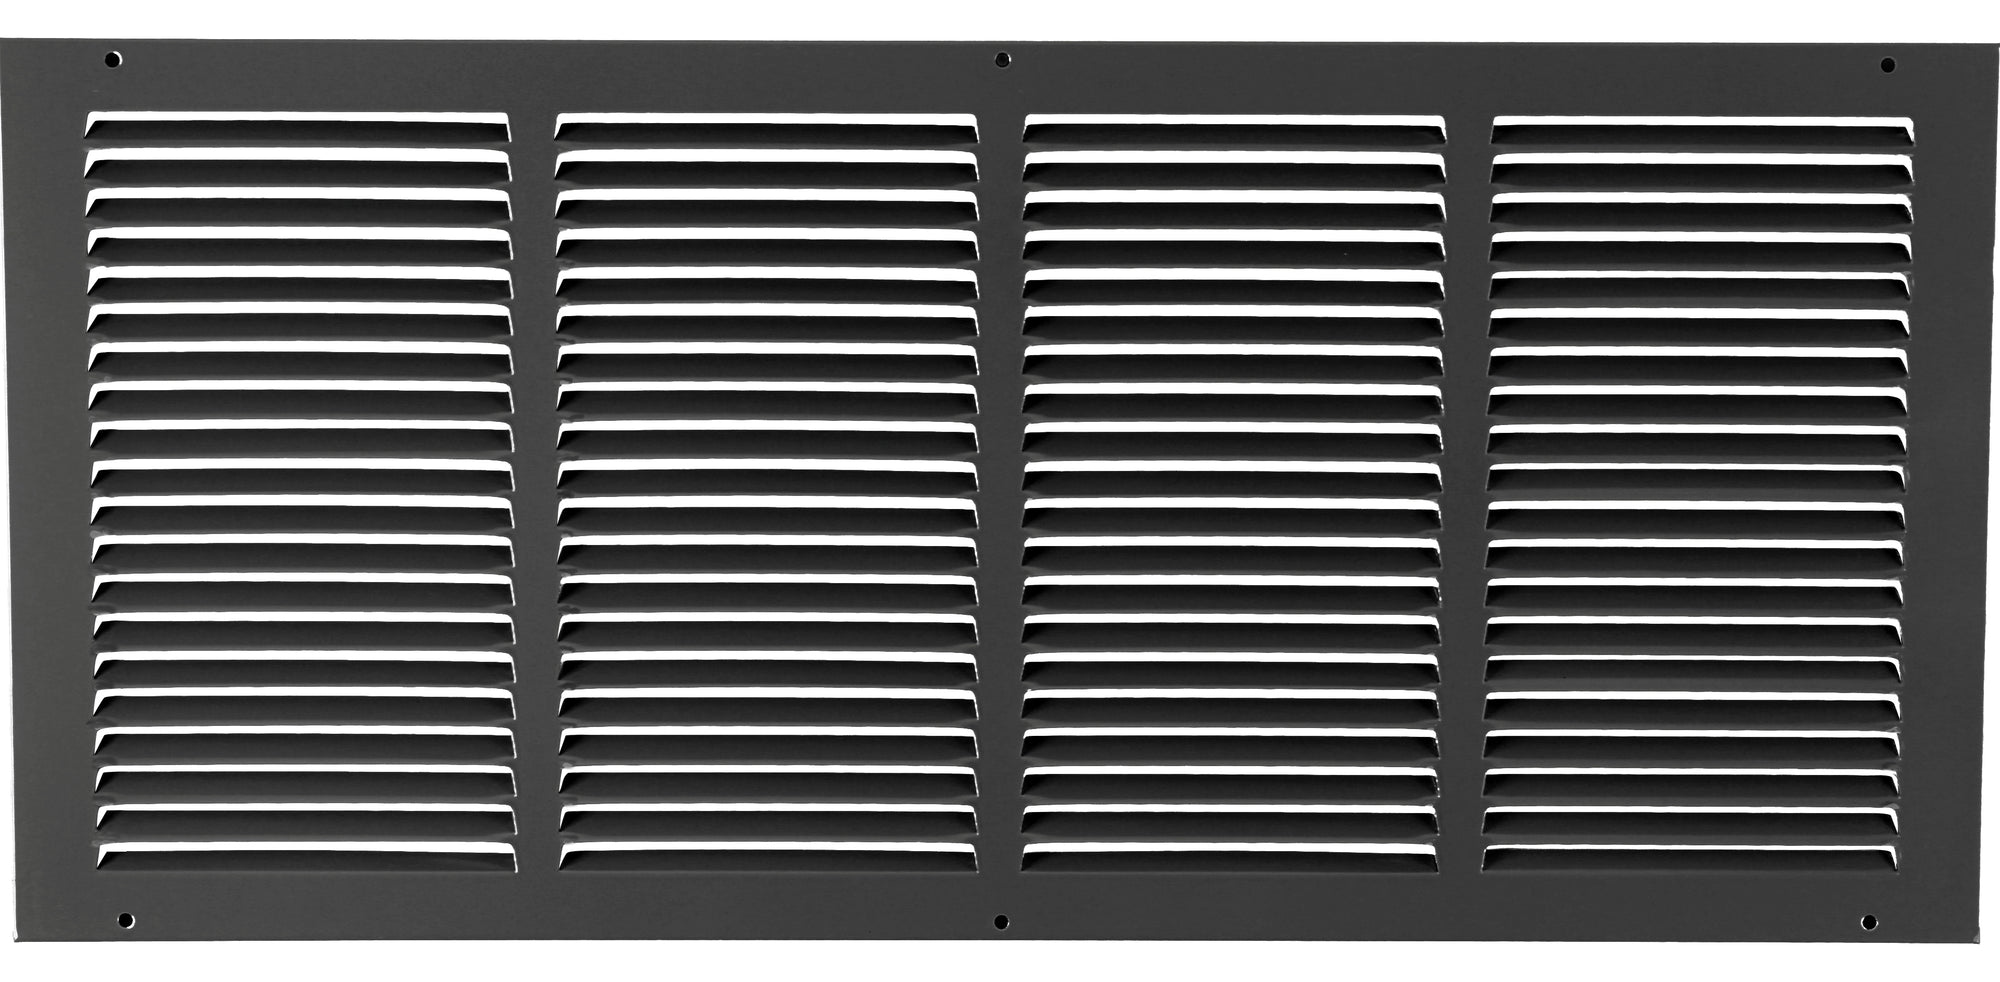 24" X 8" Air Vent Return Grilles - Sidewall and Ceiling - Steel